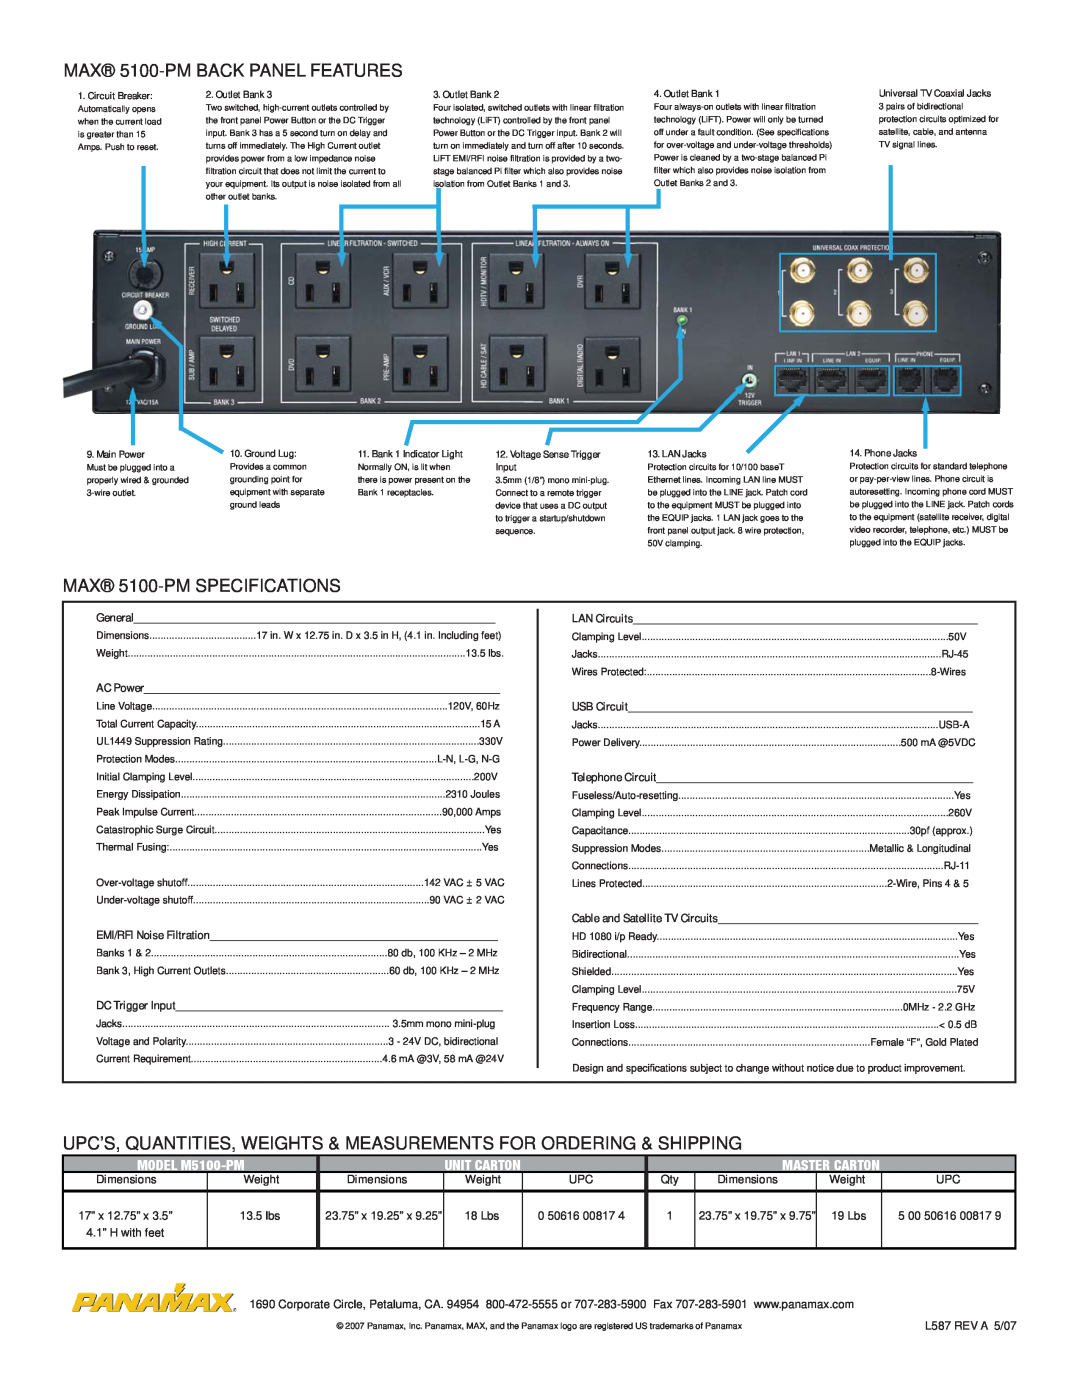 Panamax manual MAX 5100-PMBACK PANEL FEATURES, MAX 5100-PMSPECIFICATIONS, MODEL M5100-PM, 18 Lbs, 4.1” H with feet 